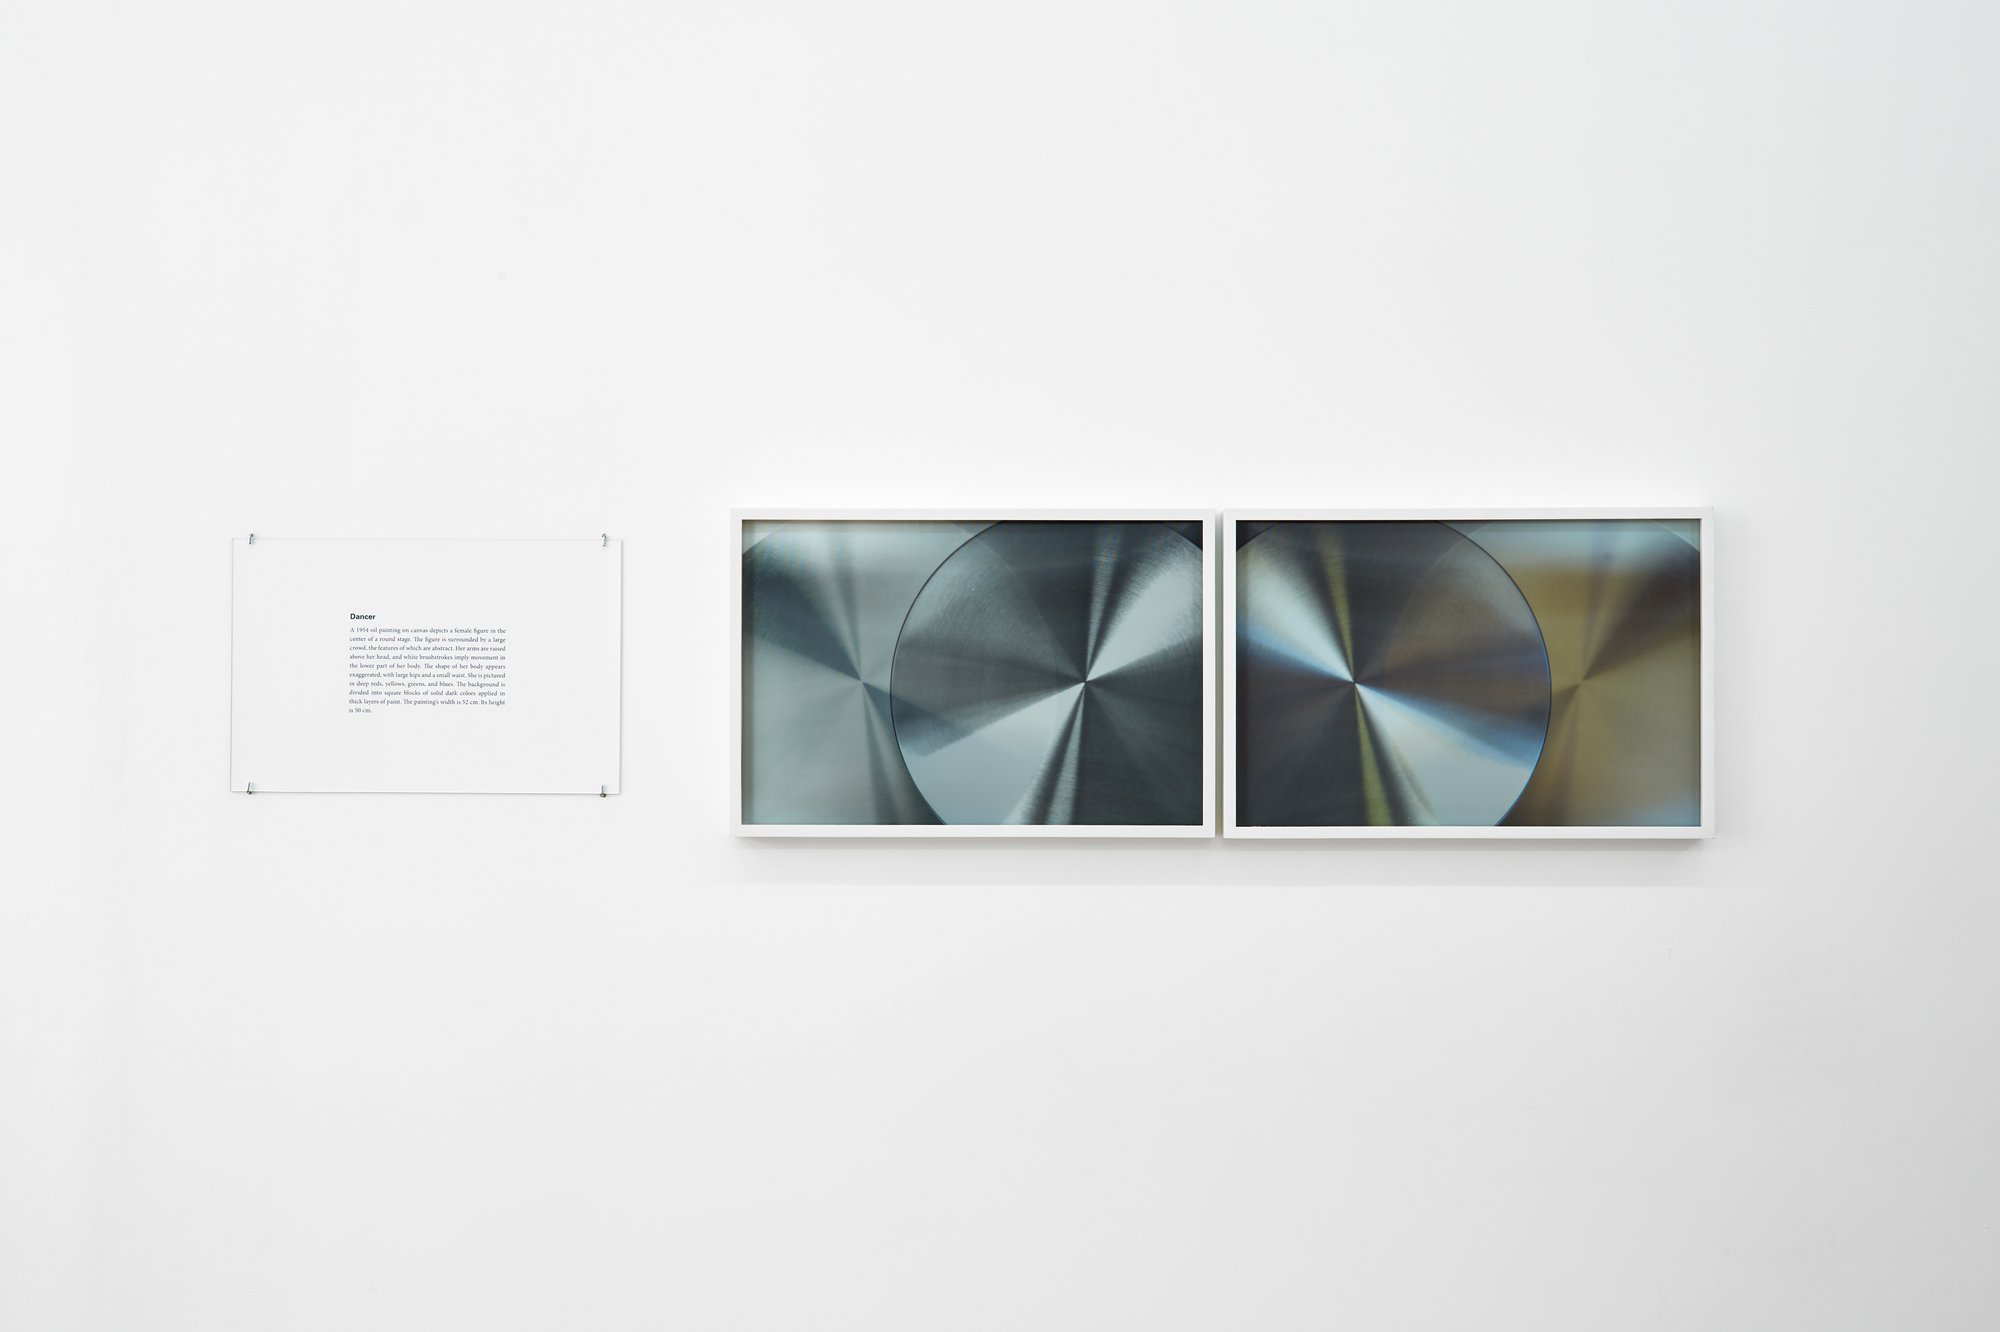 Iman Issa, Dancer (study for 2014), two lenticular prints, text panel under glass, 35.5. x 52.5 cm (each), 2014